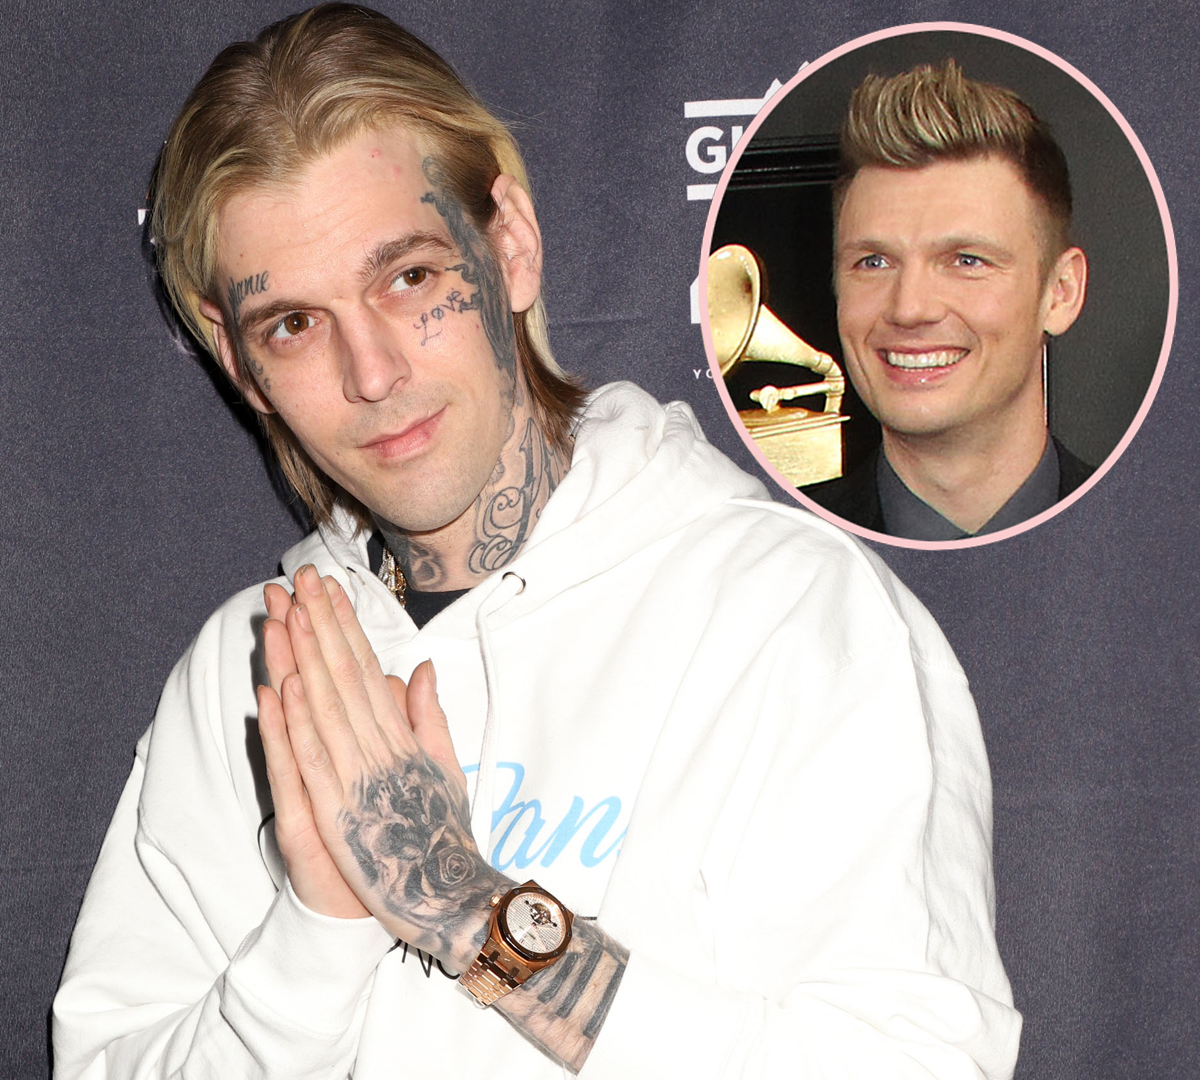 #Aaron Carter ‘Made Amends’ With Big Brother Nick Carter Before His Death, Says Rep